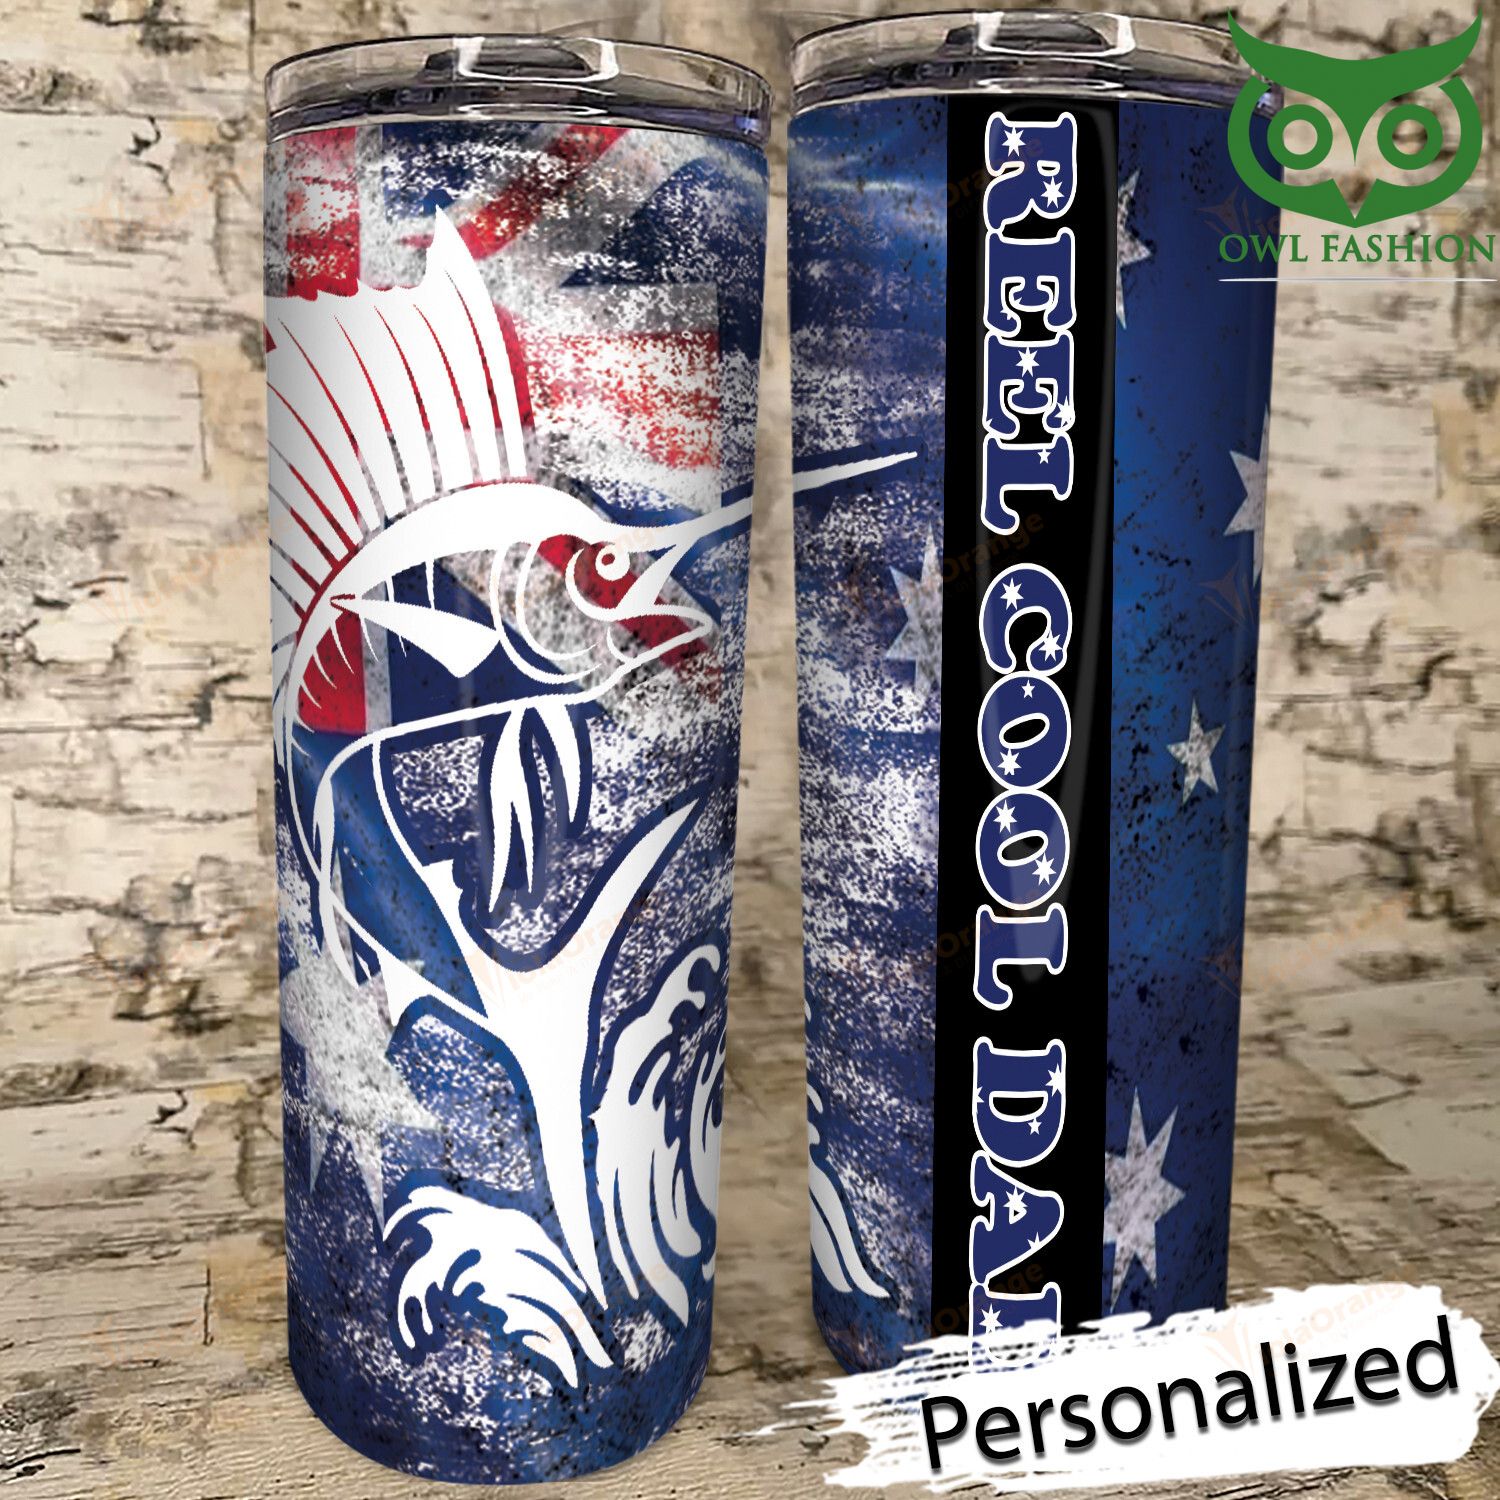 New edition Personalized Aus Fishing Skinny Tumbler CUP